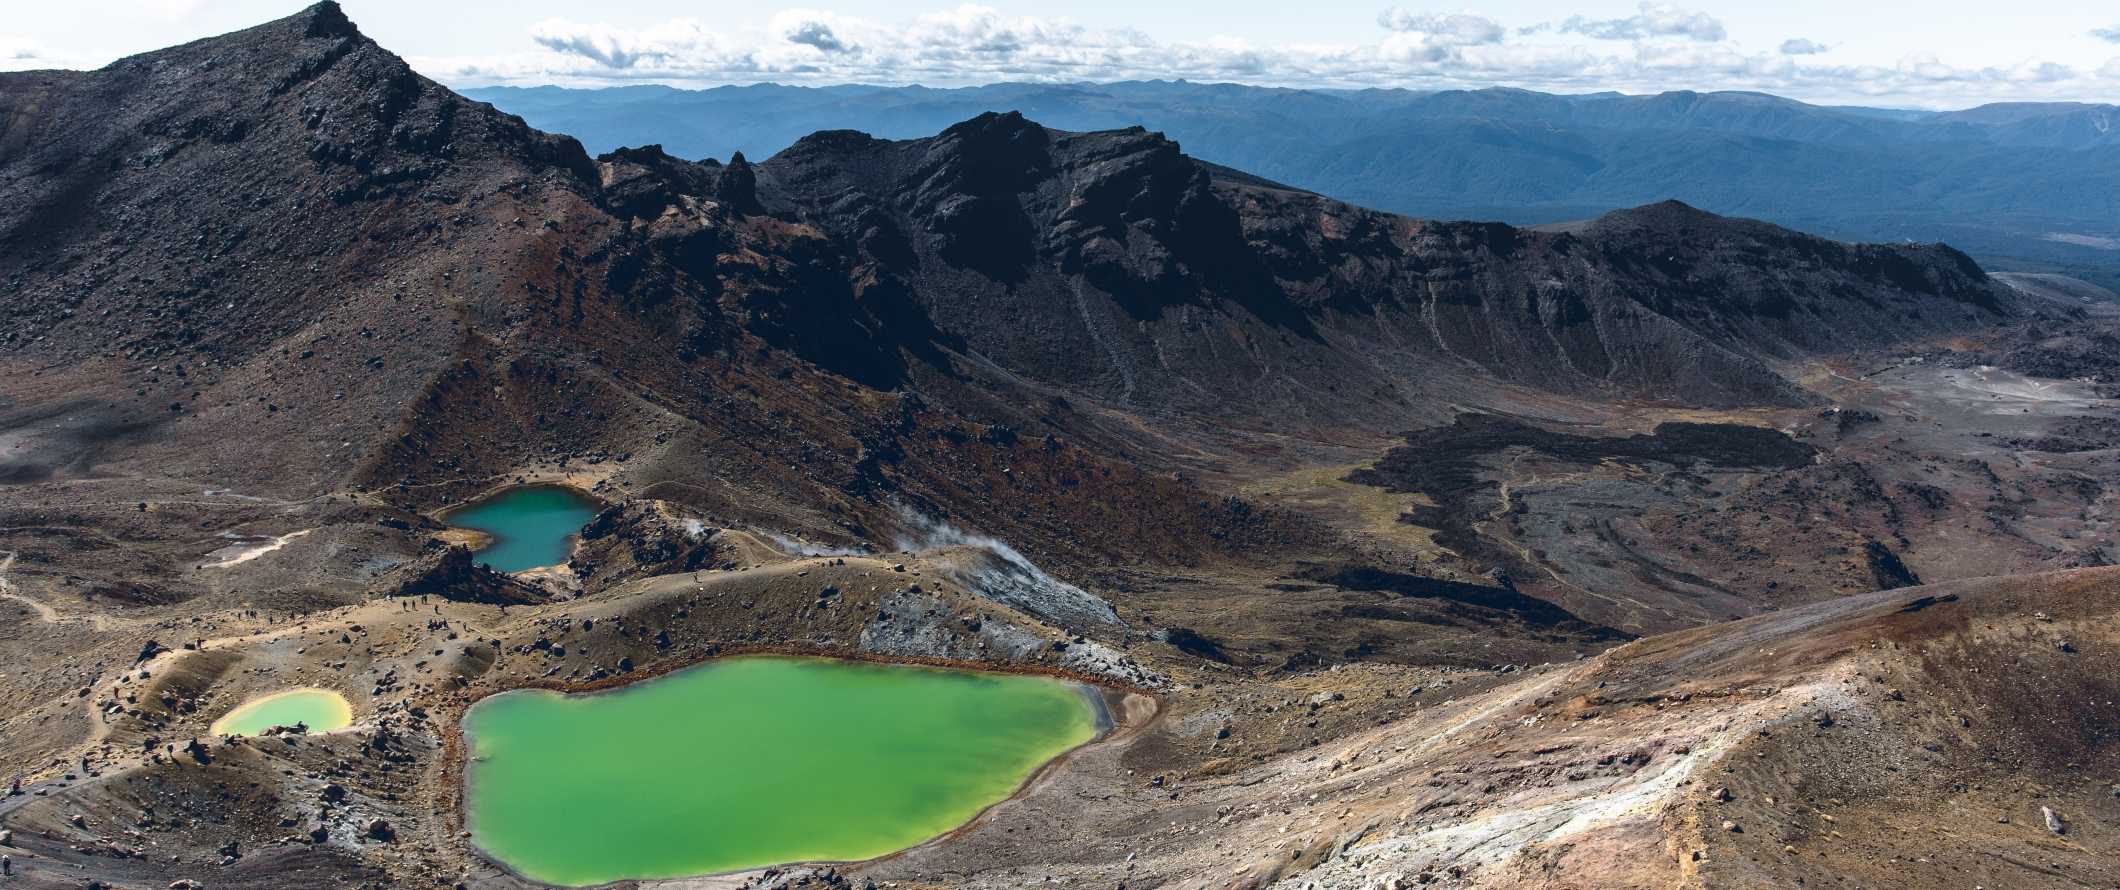 Dramatic volcanic landscapes with bright green lakes below, at Tongariro Alpine Crossing near Taupo, New Zealand.